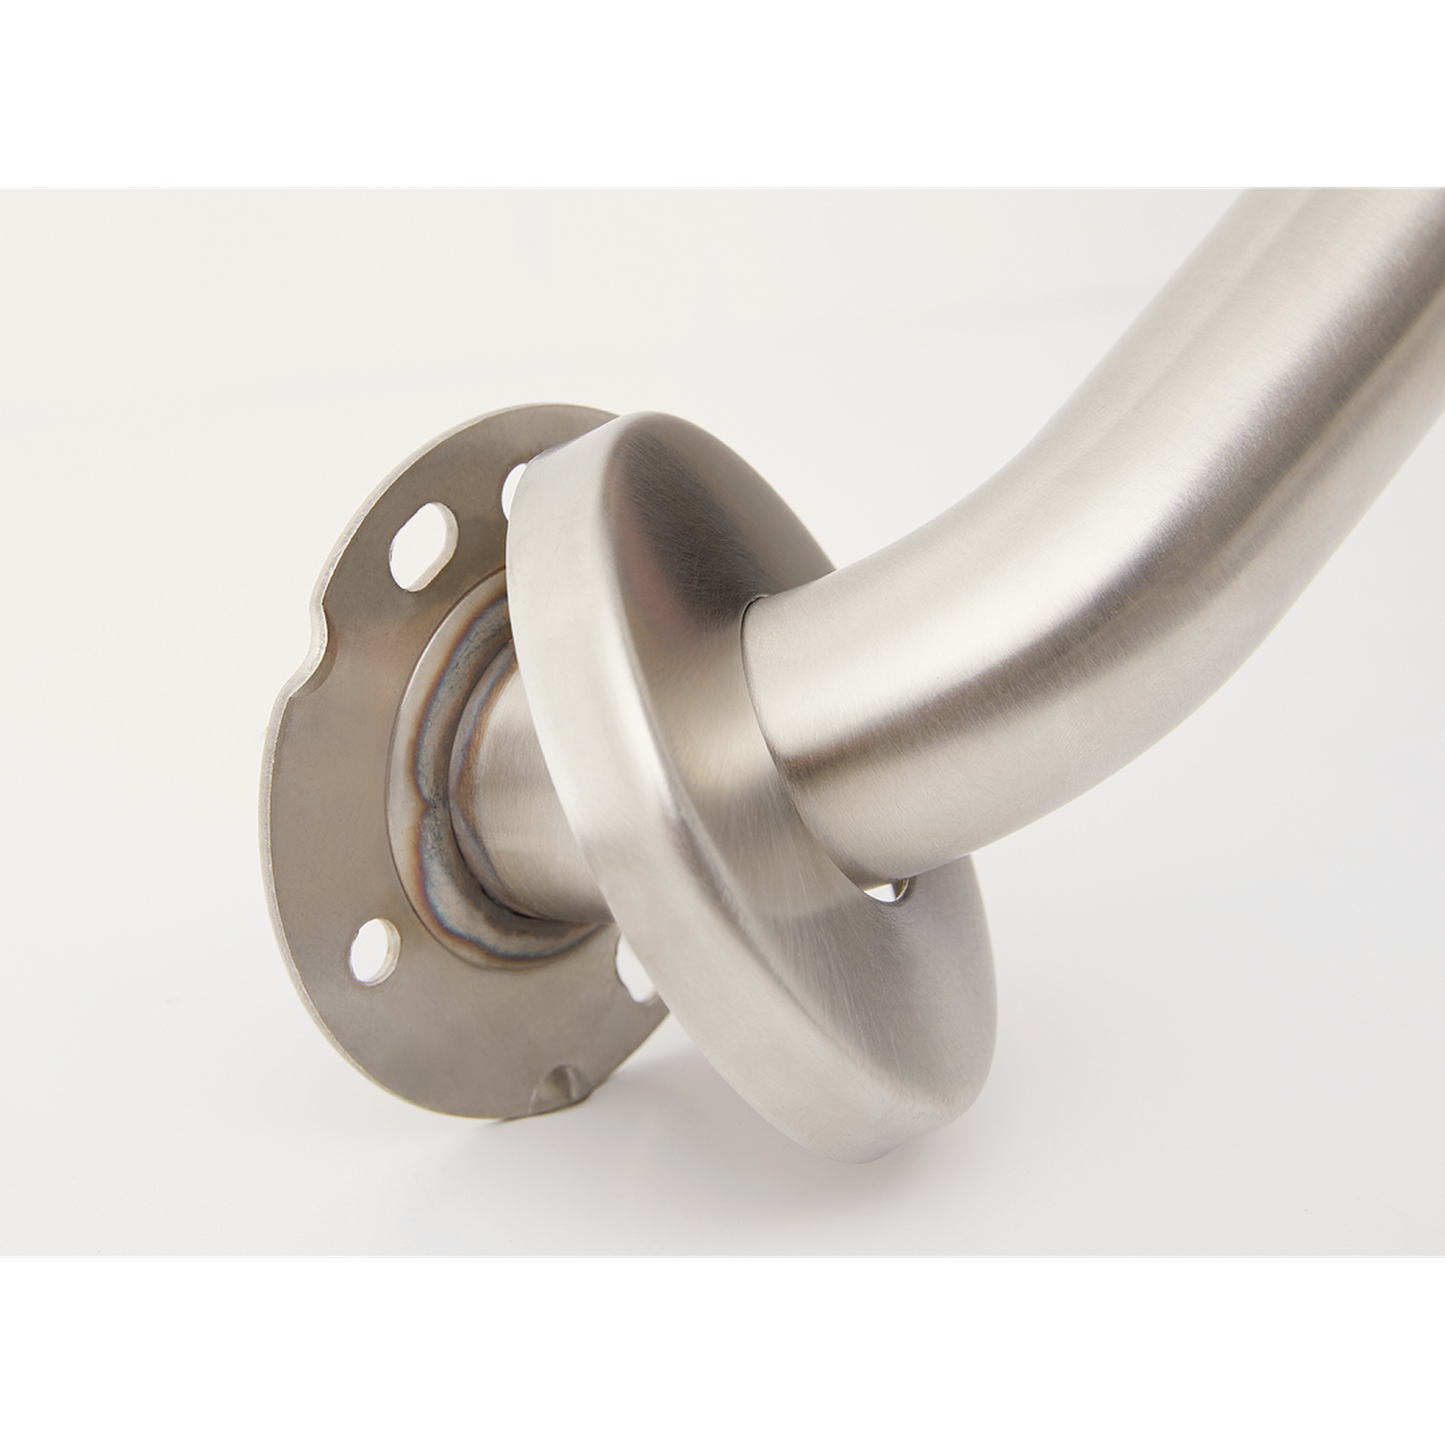 Seachrome Signature Series 52" Satin Stainless Steel 1.25 Diameter Concealed Flanges Bariatric Grab Bar